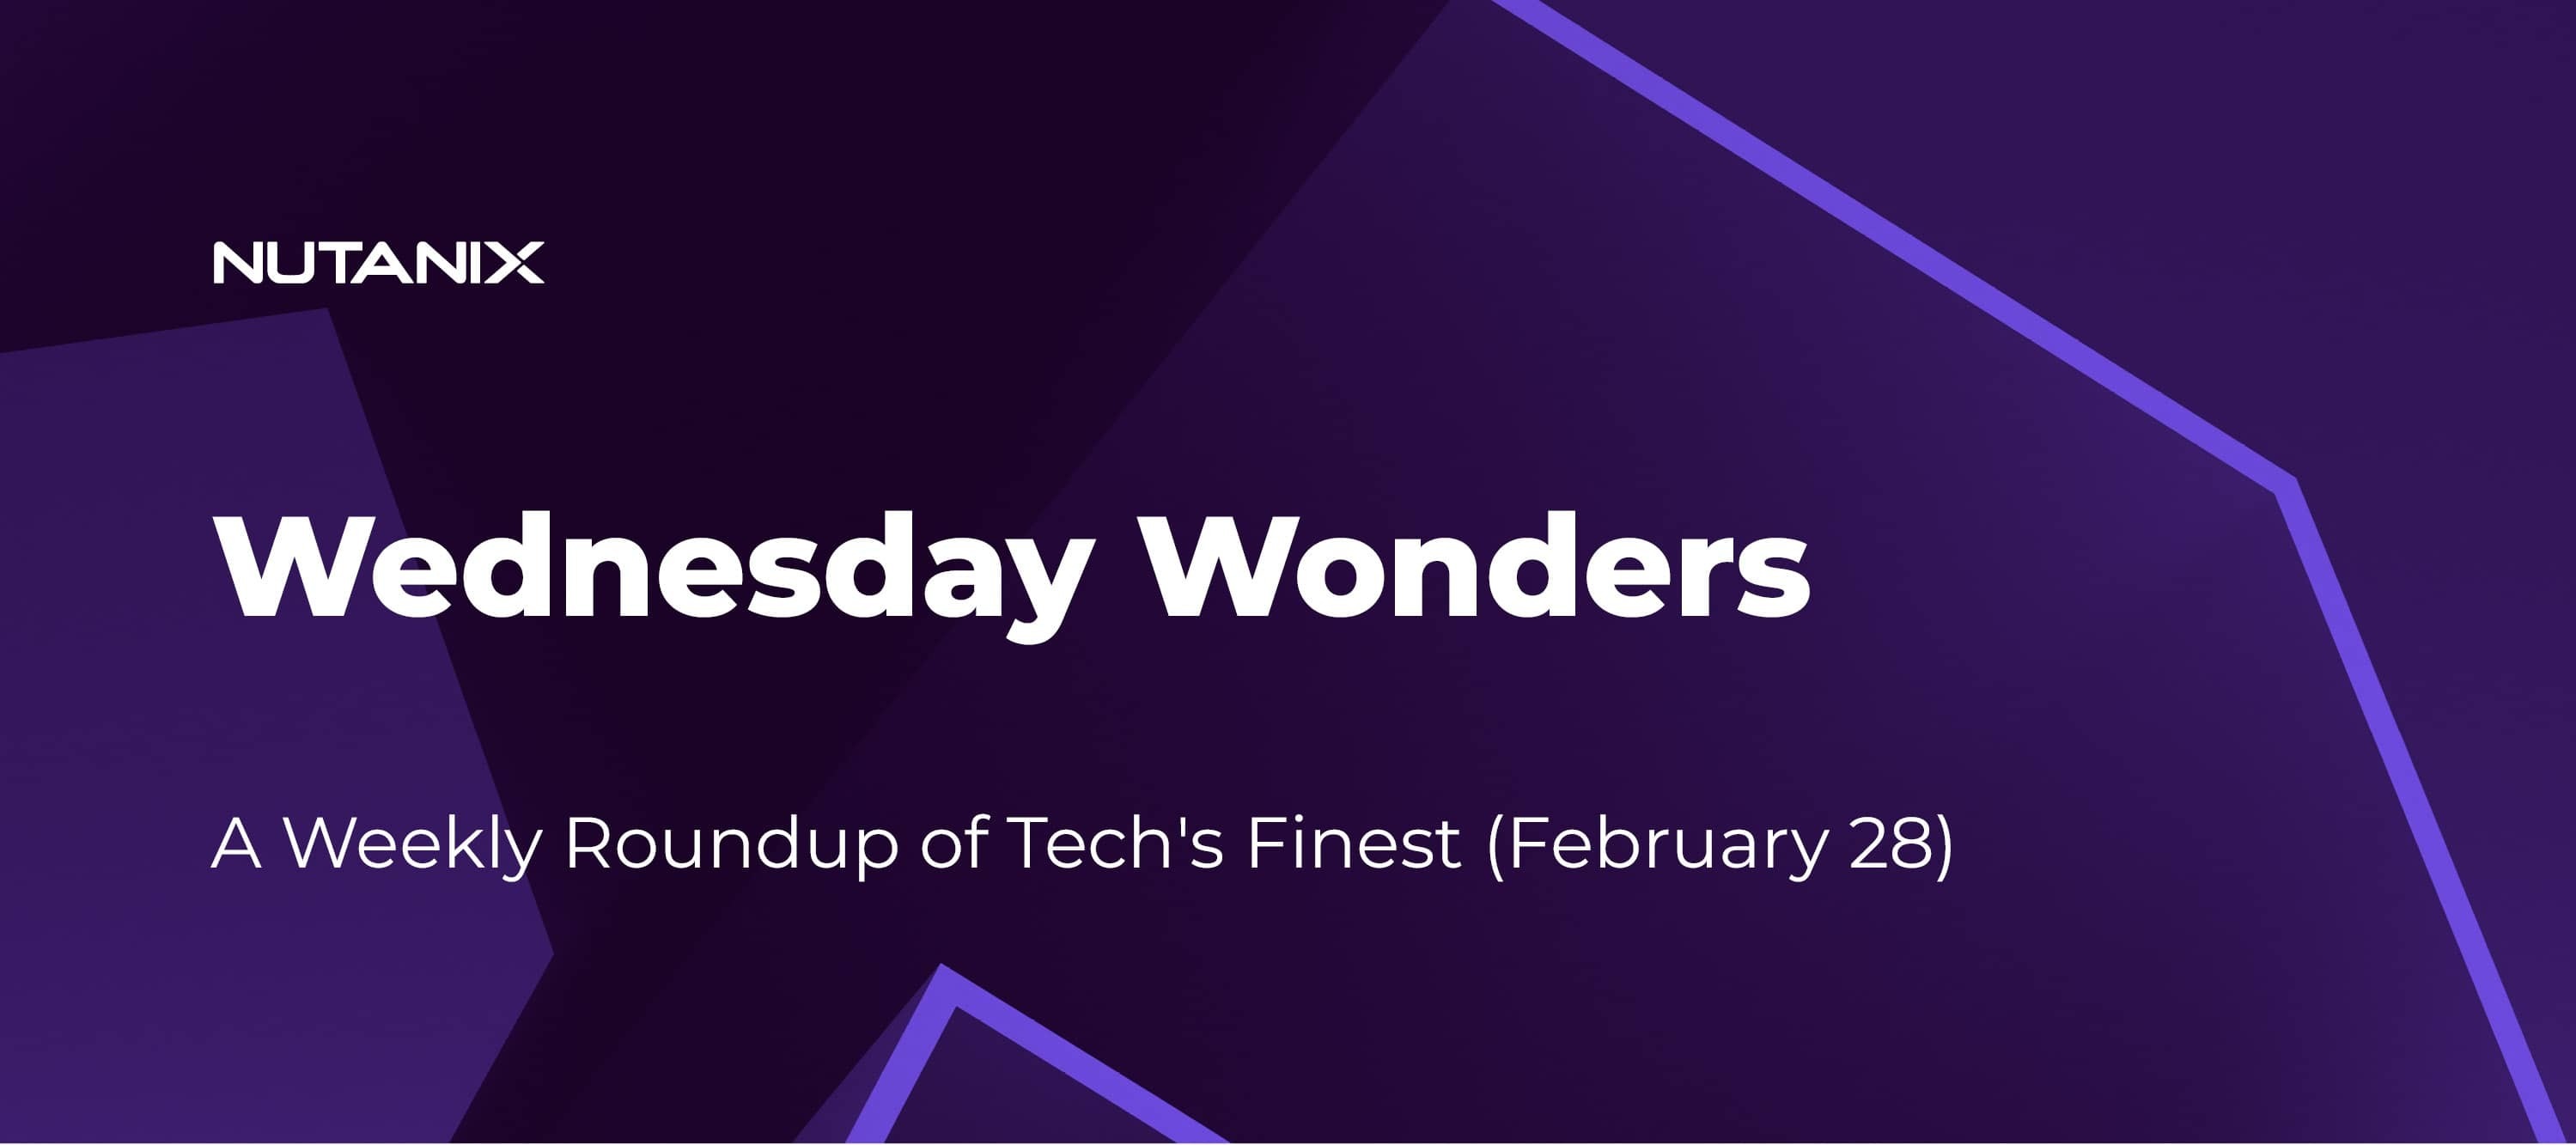 Wednesday Wonders: A Weekly Roundup of Tech's Finest (February 28)